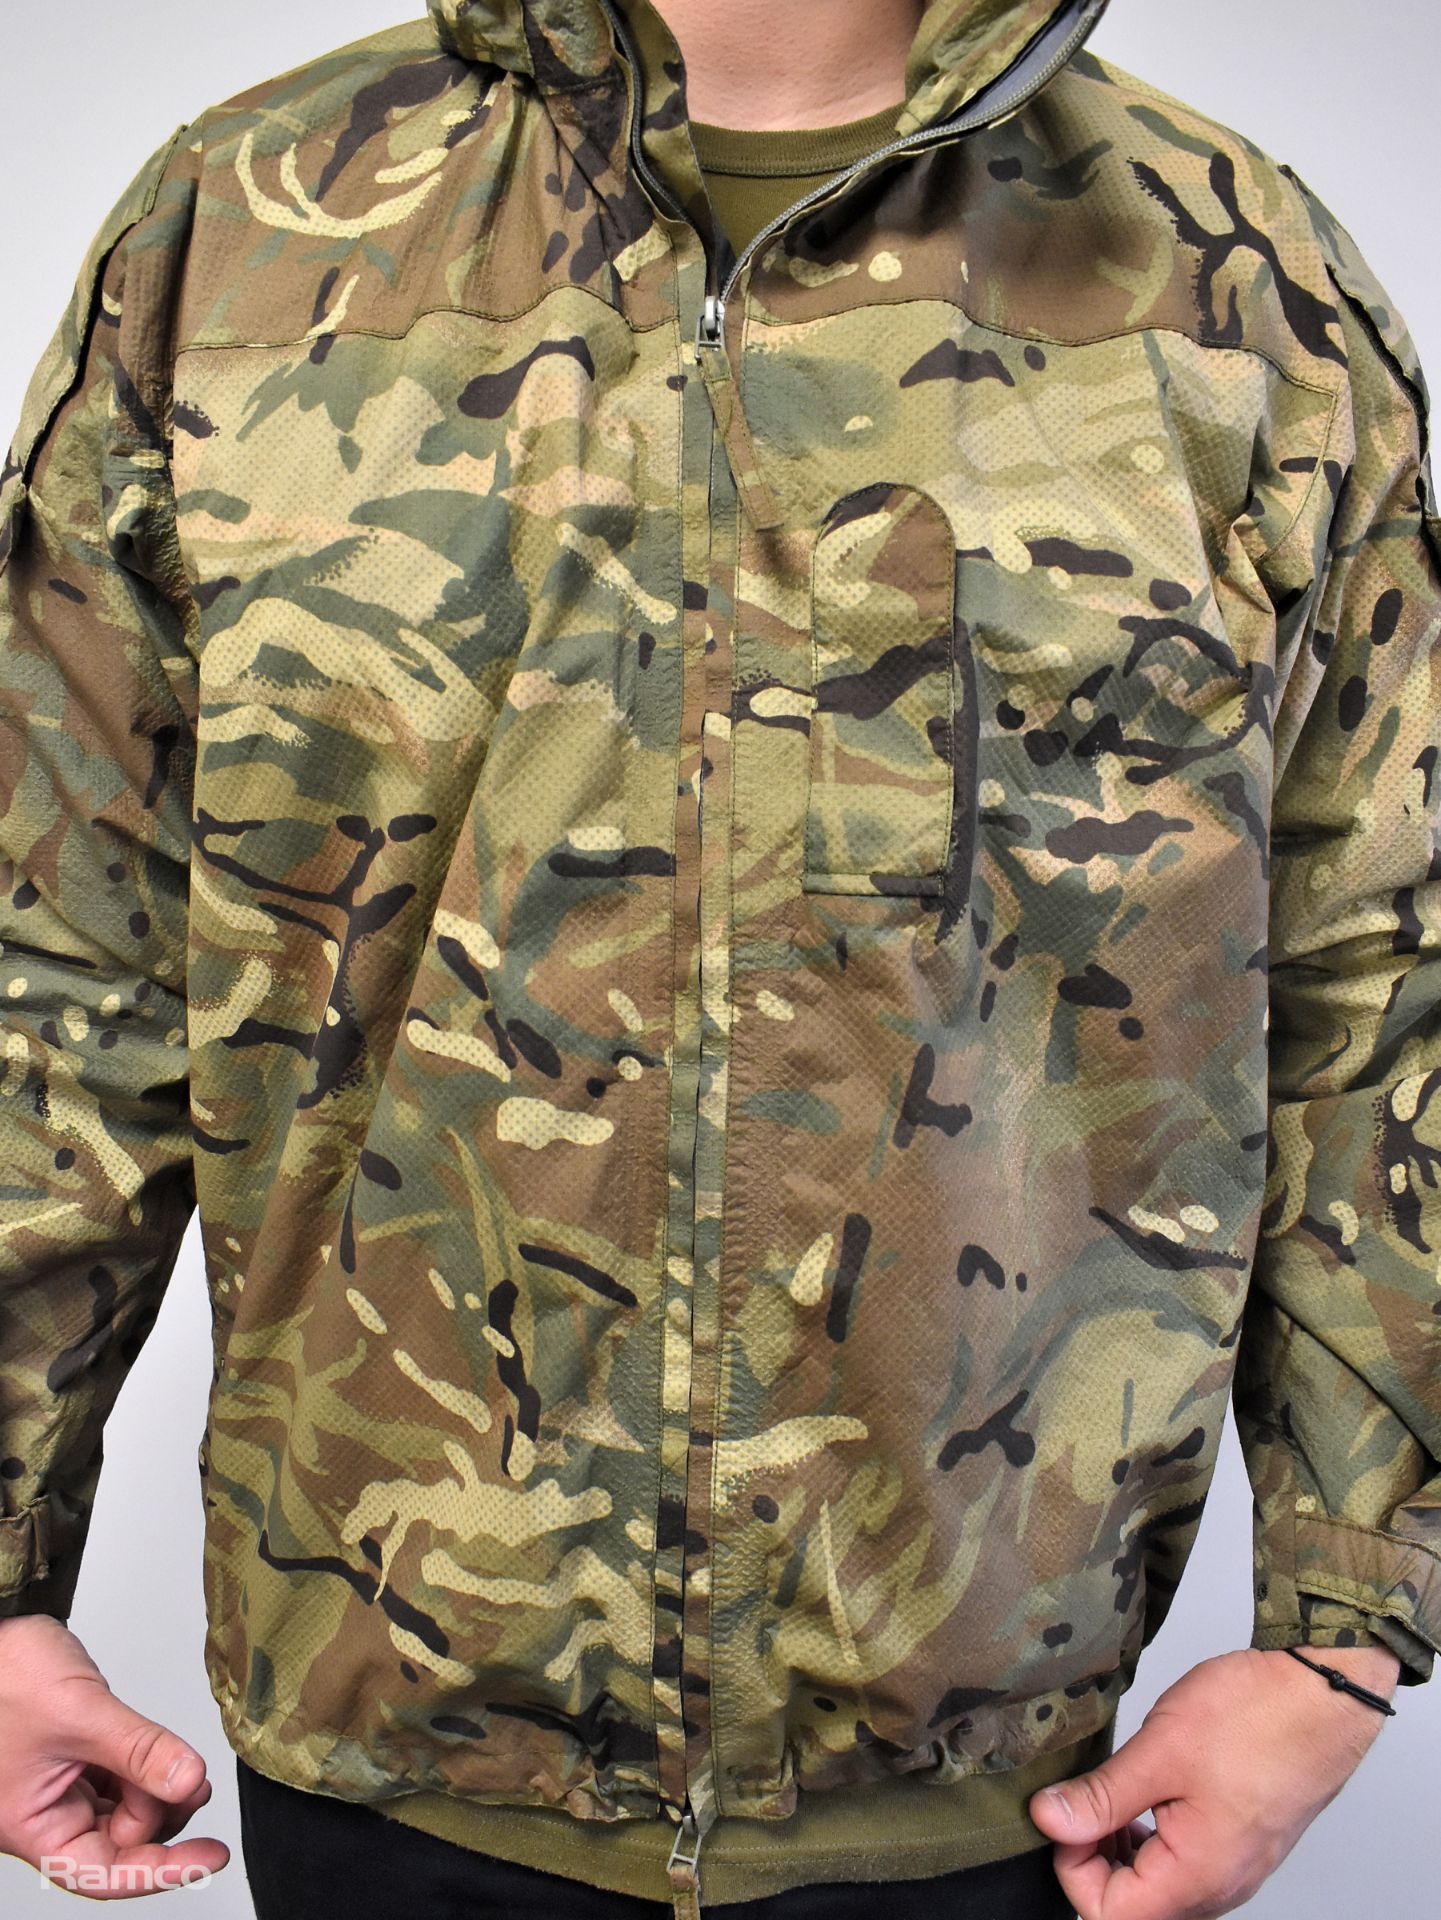 80x British Army MTP waterproof lightweight jackets - mixed grades and sizes - Image 5 of 11